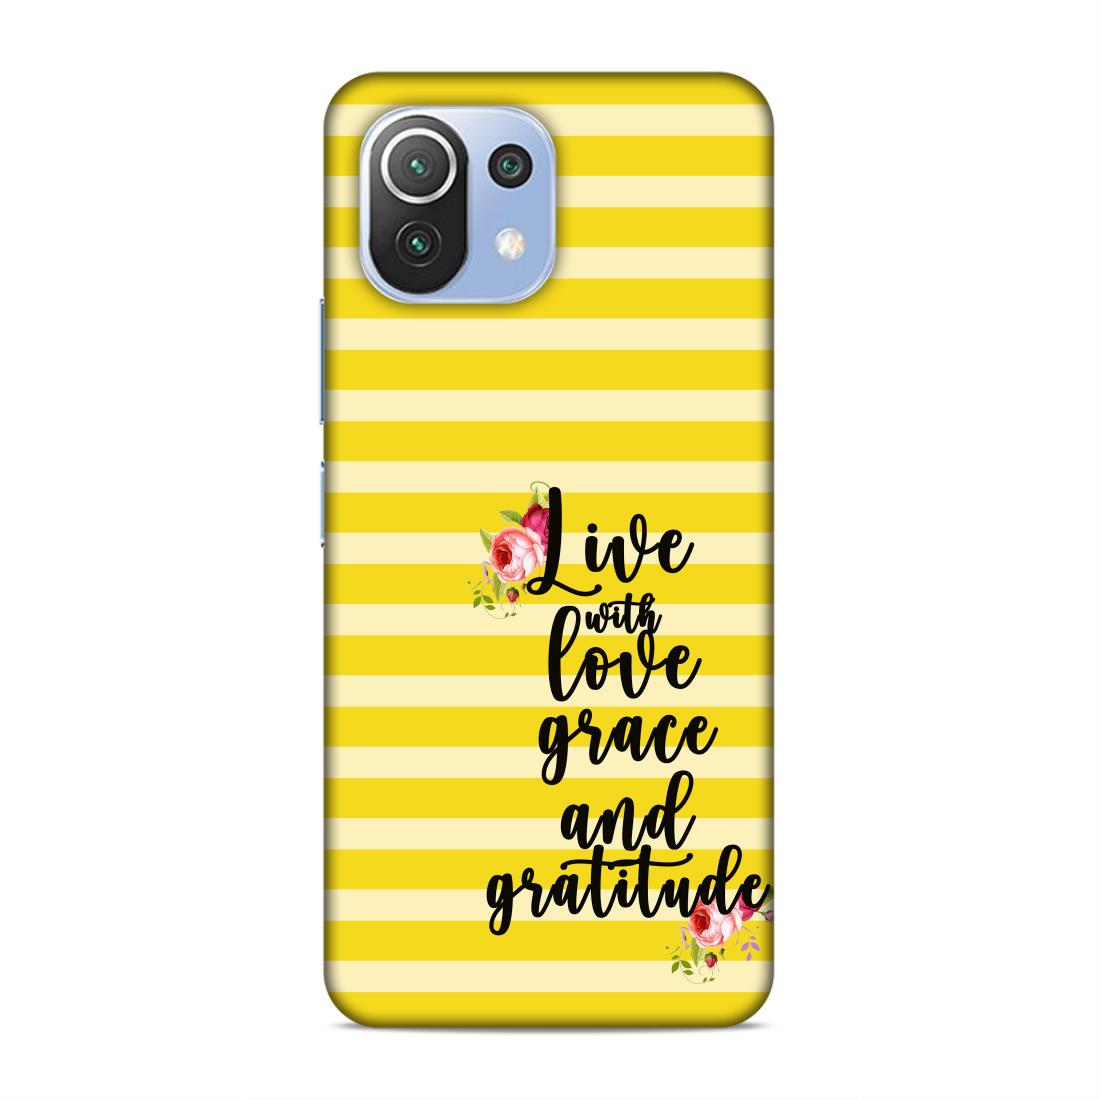 Live with Love Grace and Gratitude Hard Back Case For Xiaomi Mi 11 Lite